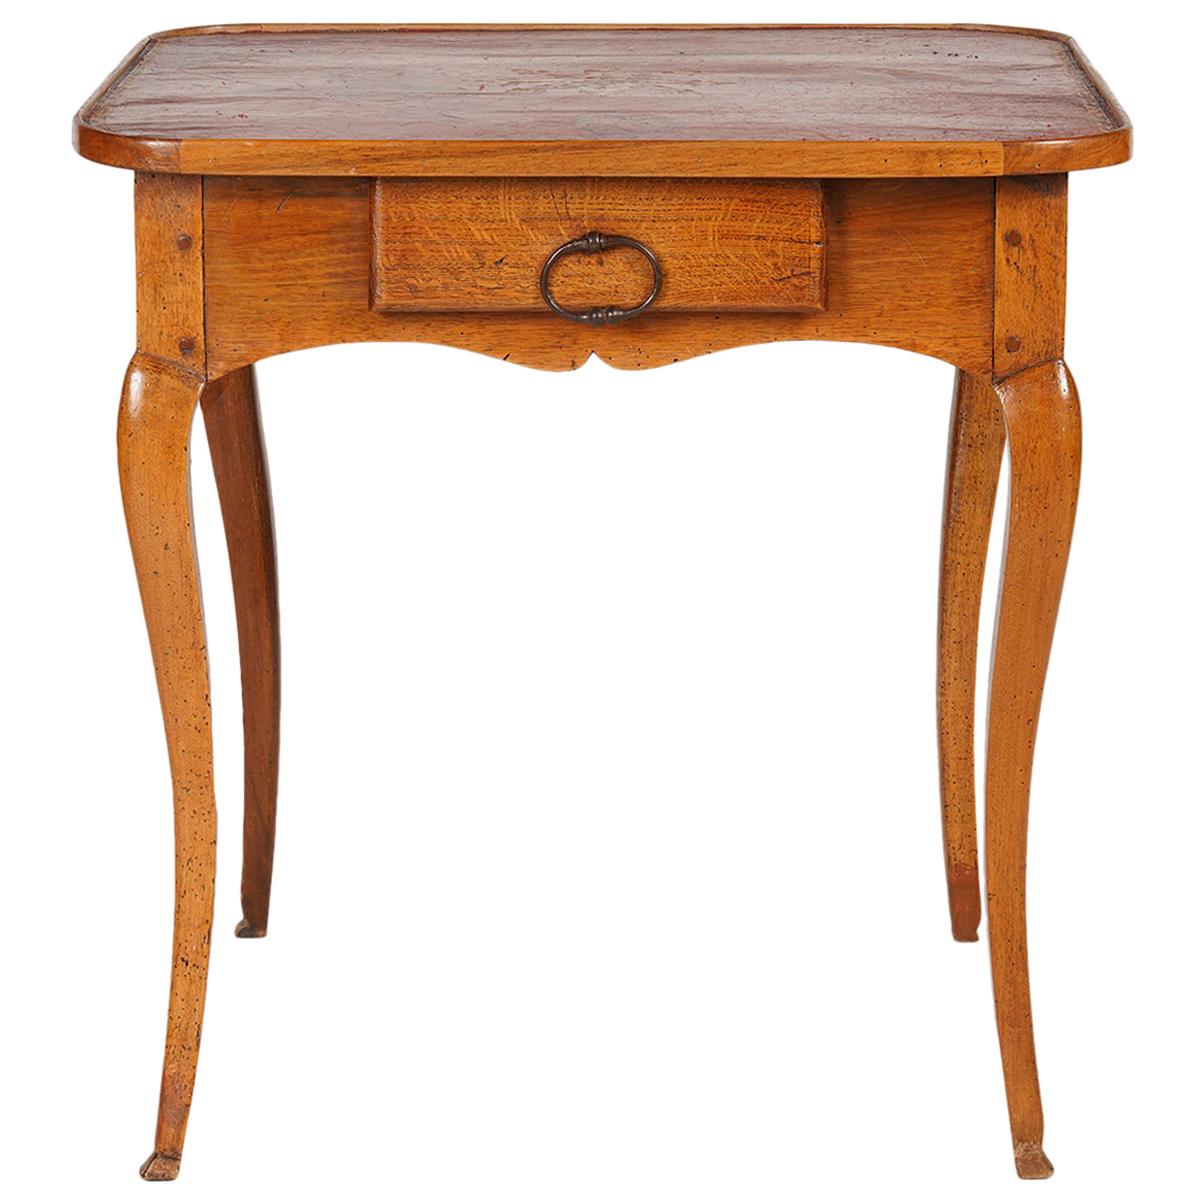 Italian Provincial 18th Century Oakwood Side Table with Leather Lined Top